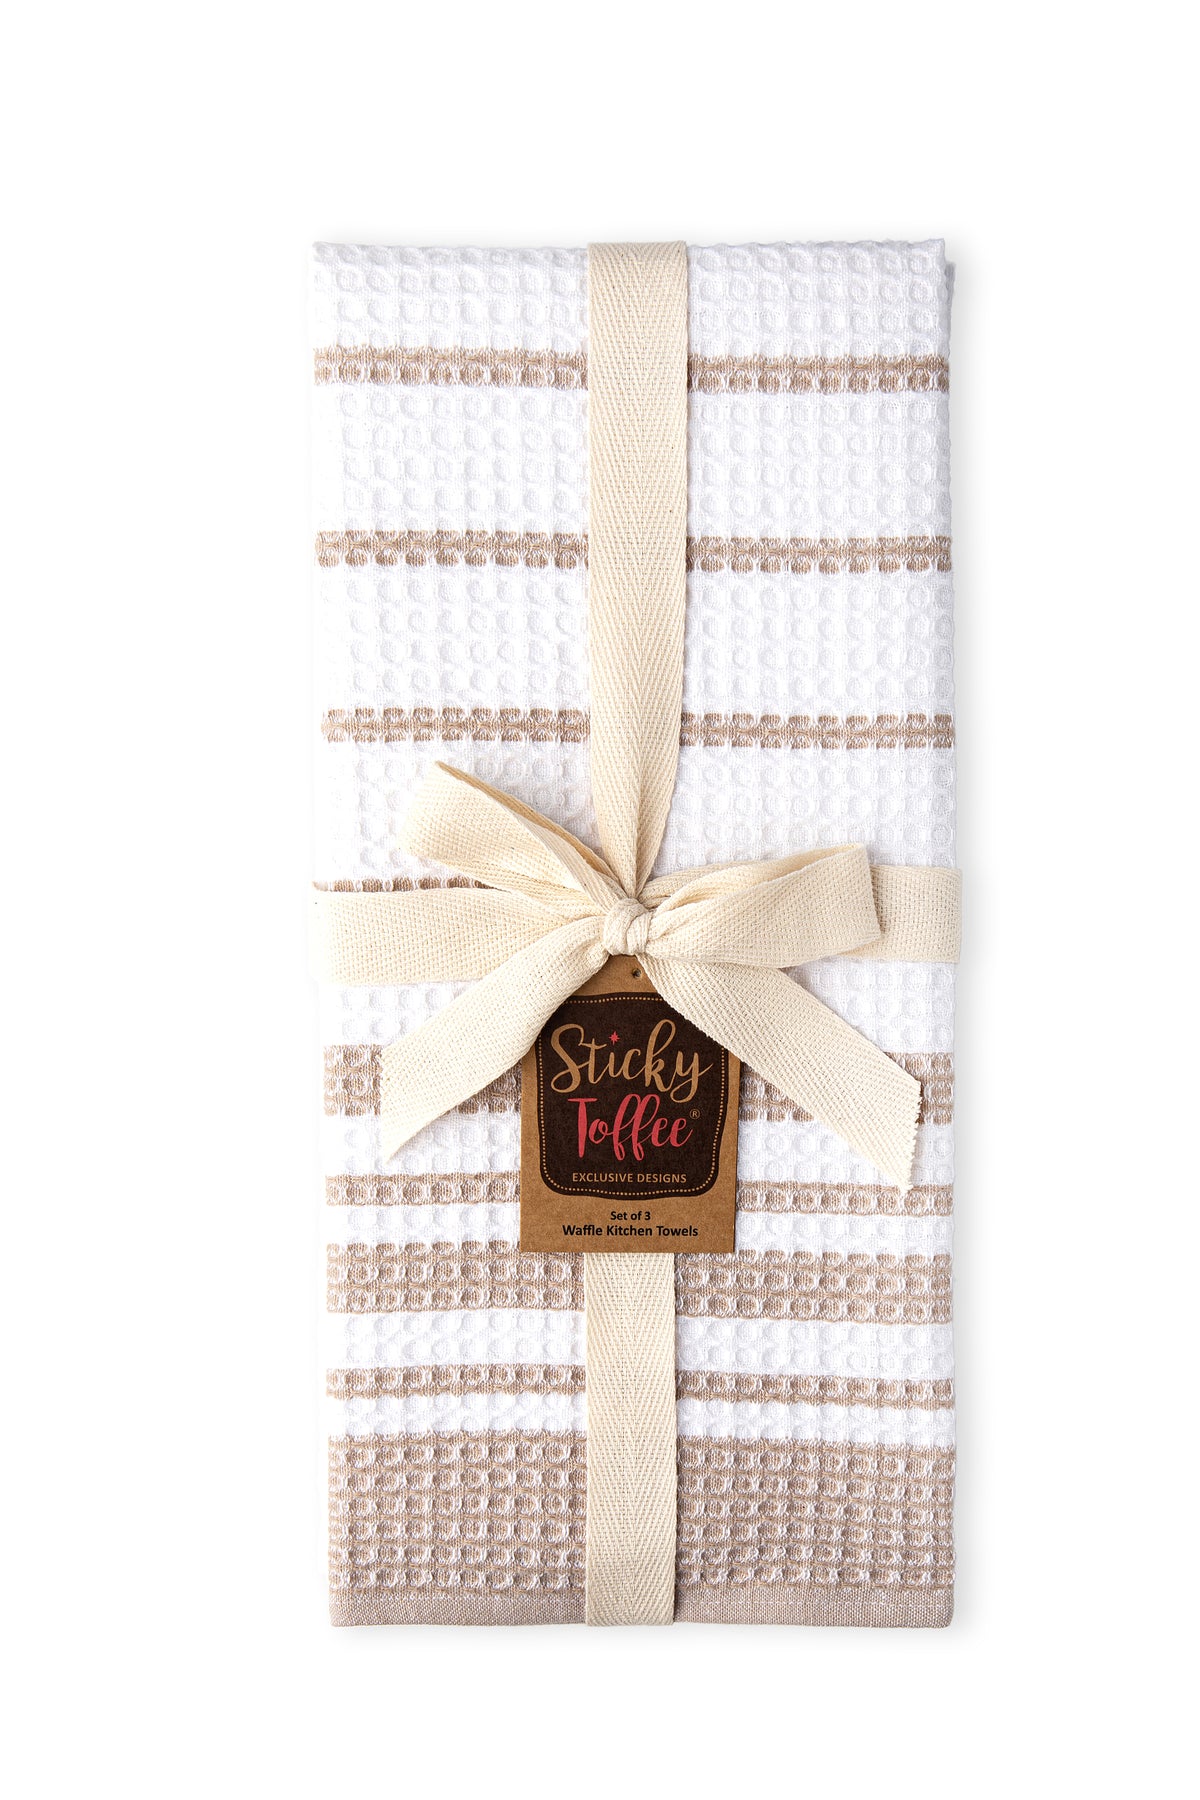 Sticky Toffee Kitchen Towels Dishcloths 100% Cotton, White Waffle Weave  Bleach Friendly, Set of 8, 12 in x 12 in, Absorbent Cleaning Paperless Dish  Cloths, Tan Border 